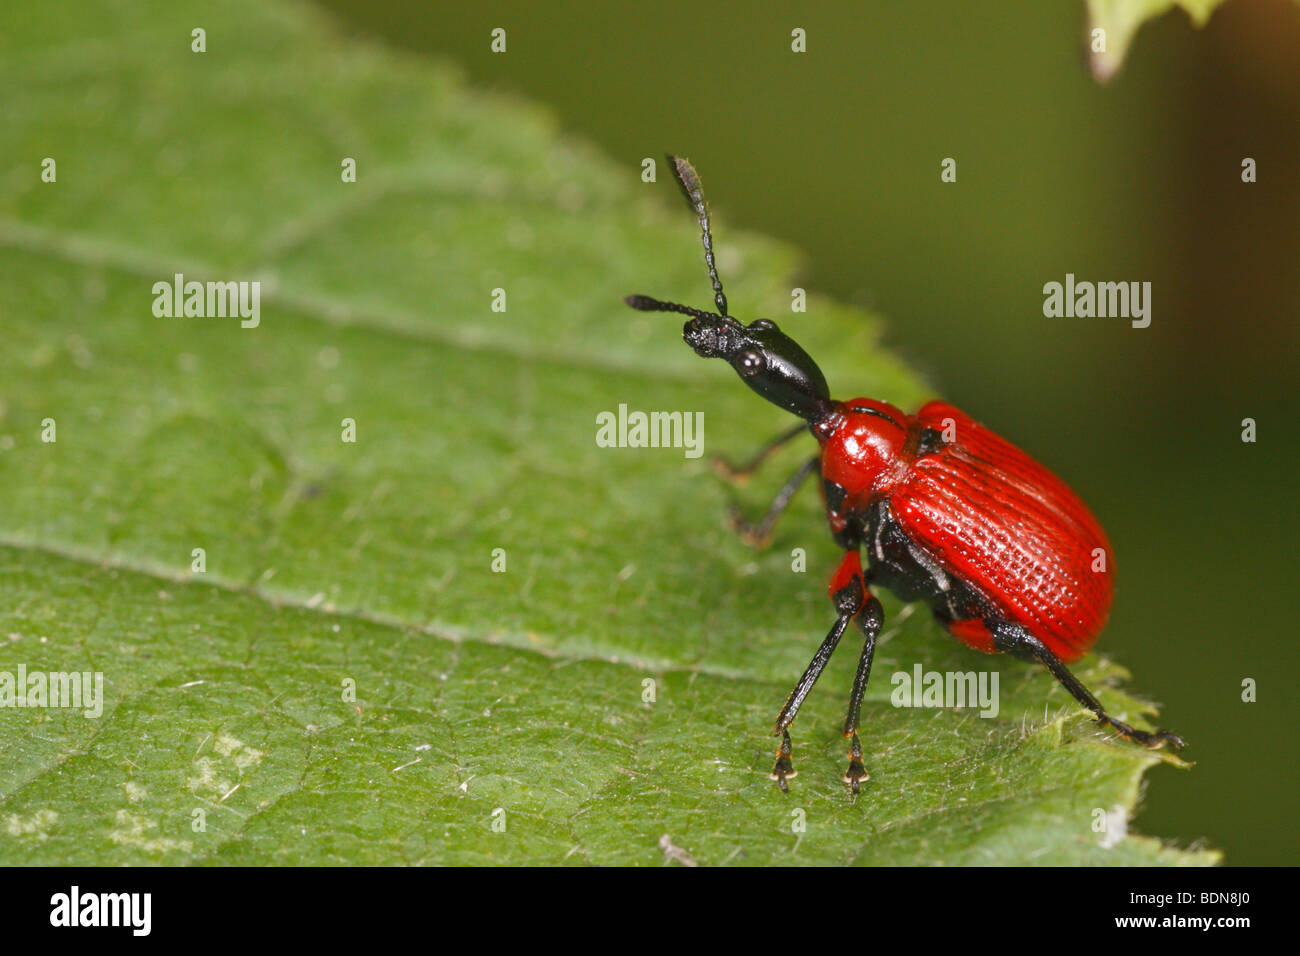 Apoderus coryli, the hazel leaf-roller. This is a weevil. Stock Photo